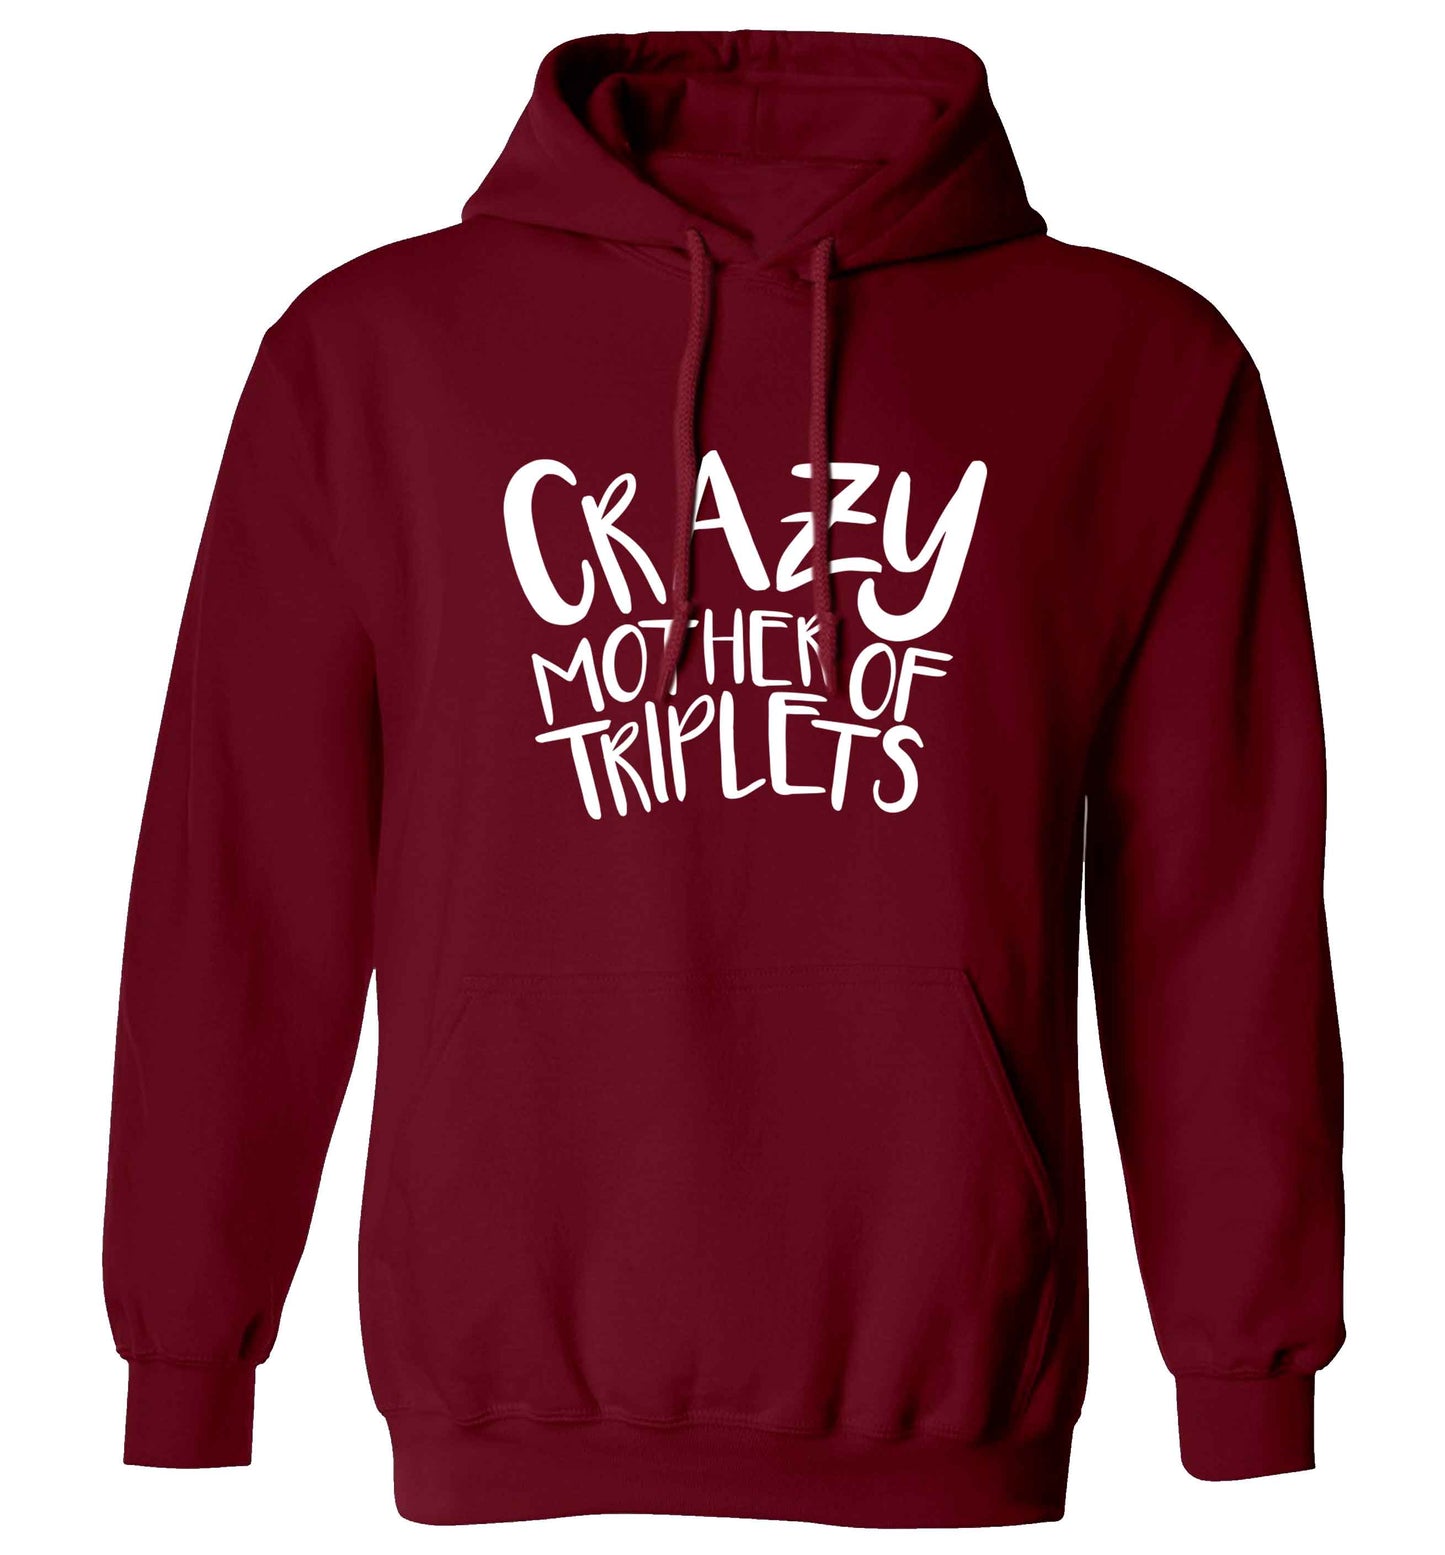 Crazy mother of triplets adults unisex maroon hoodie 2XL